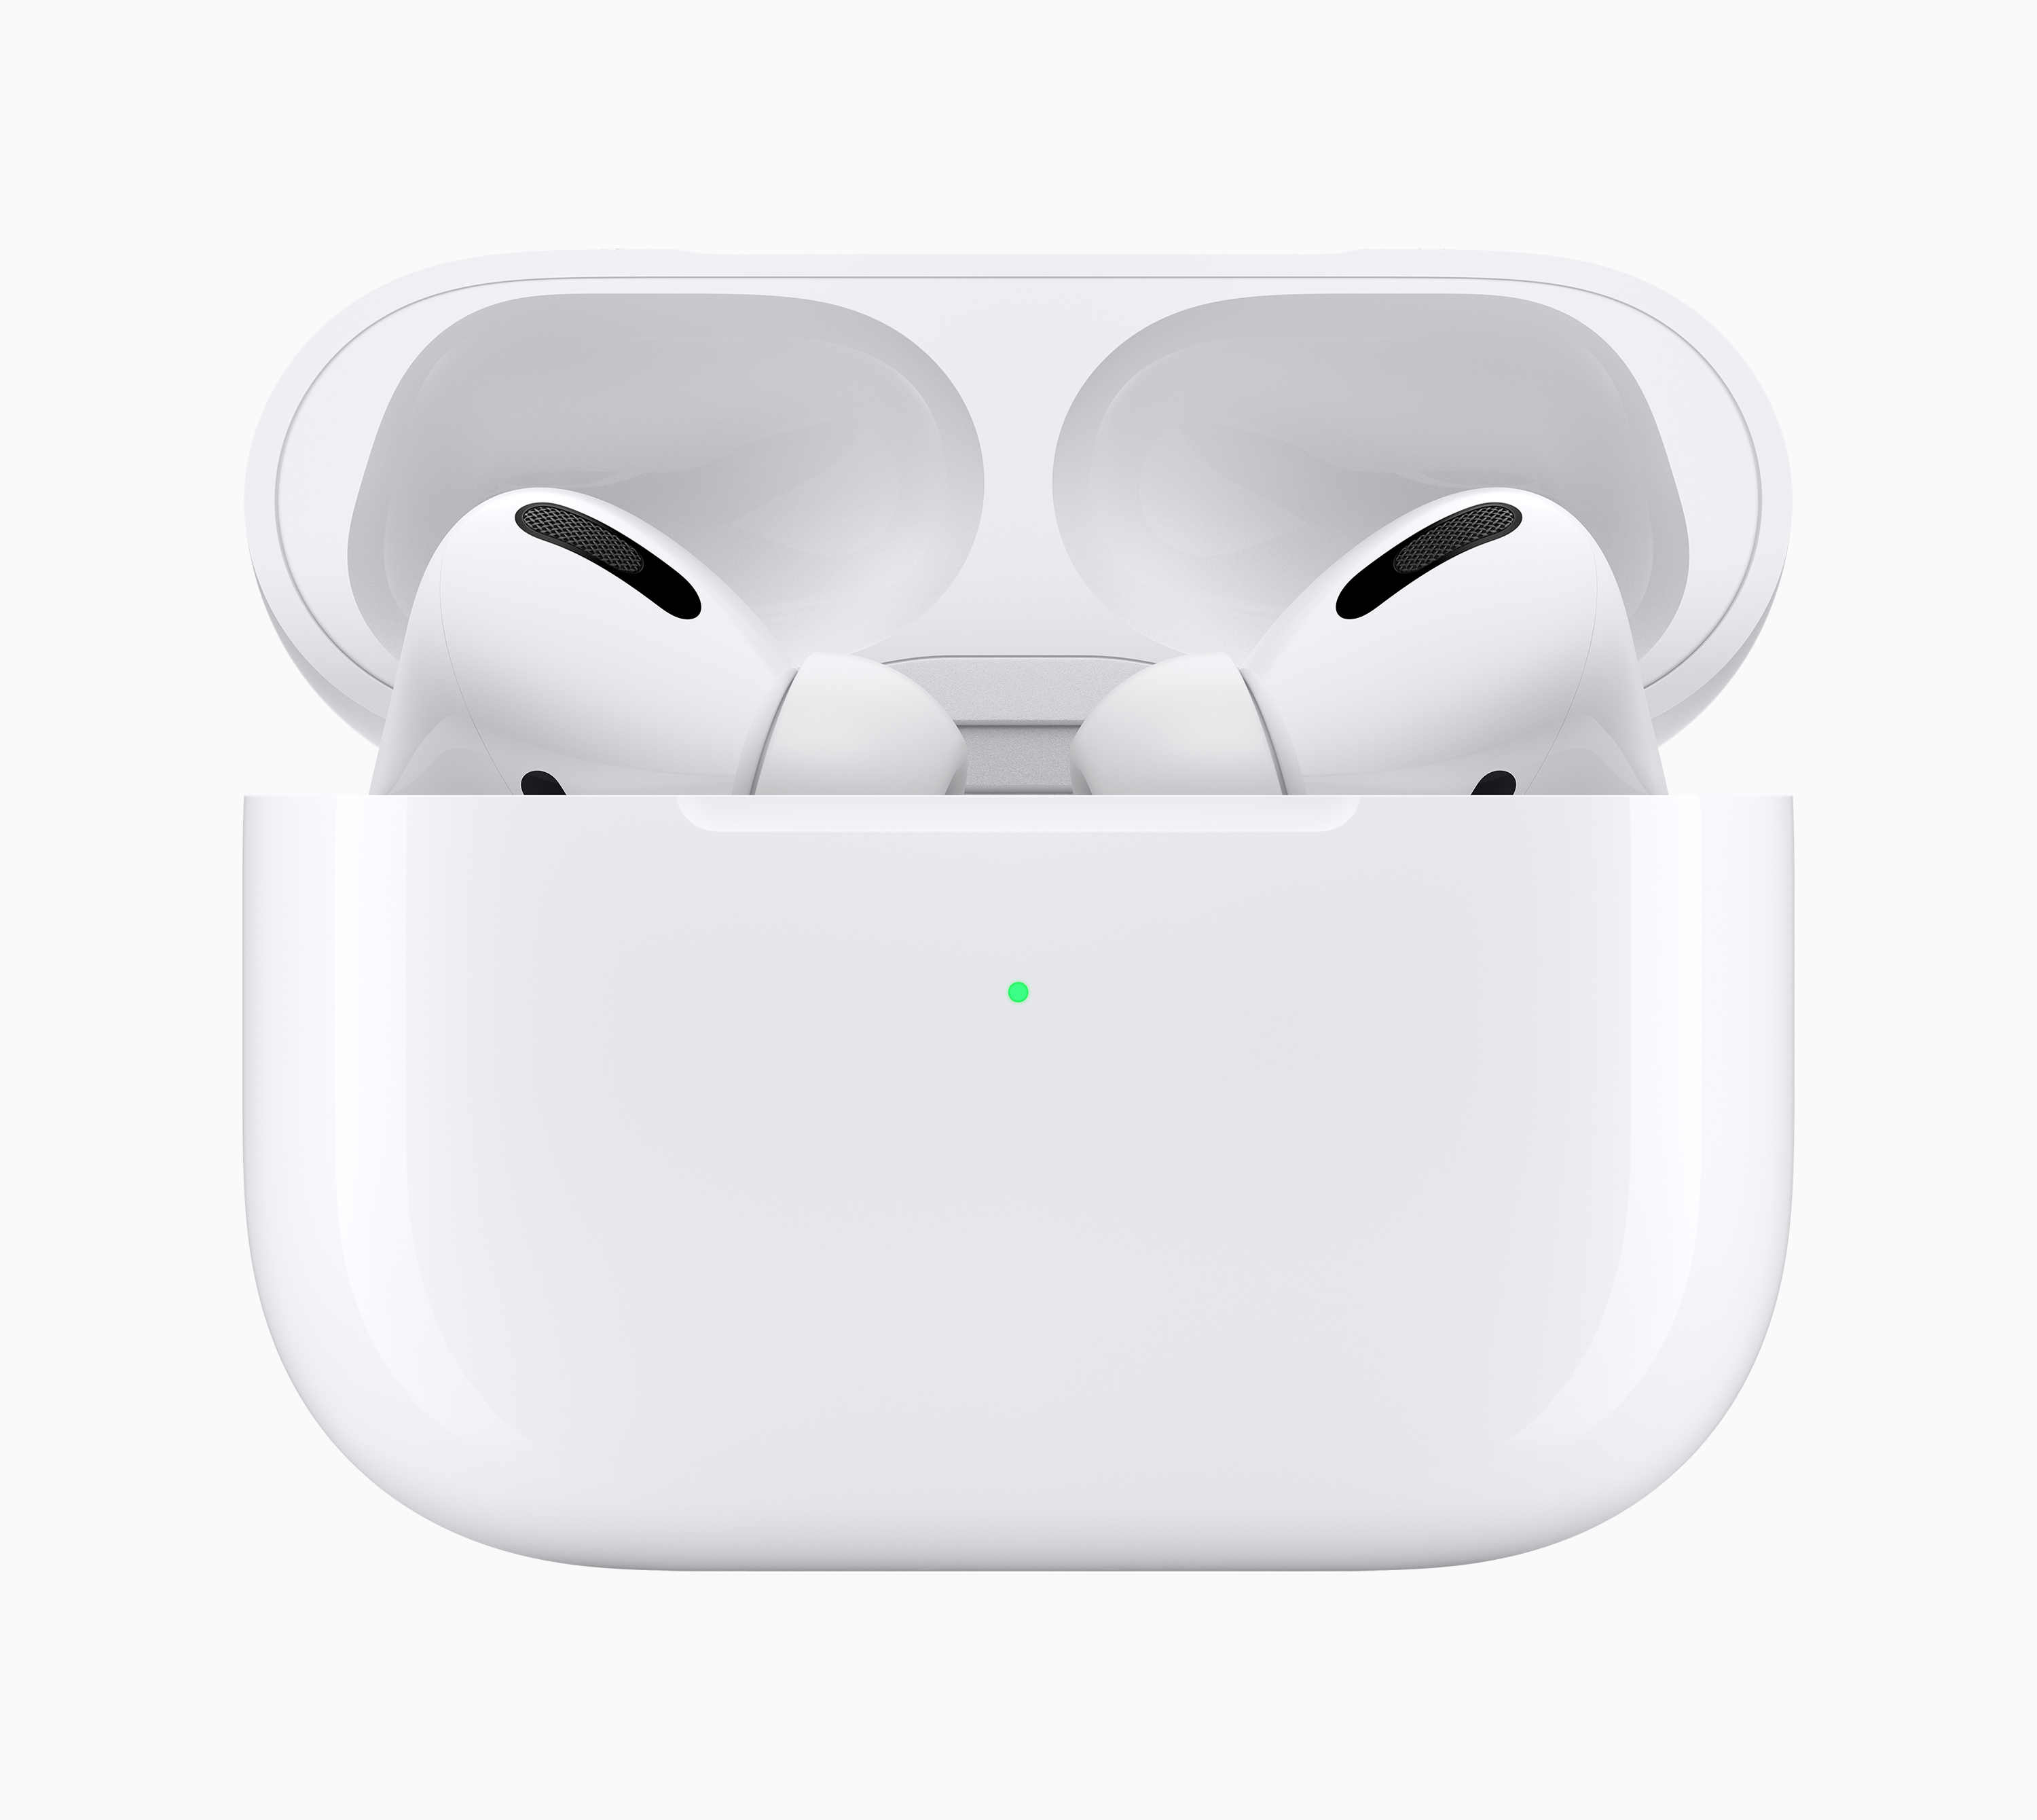 Find the best deal on Apple’s new AirPods Pro using our exclusive